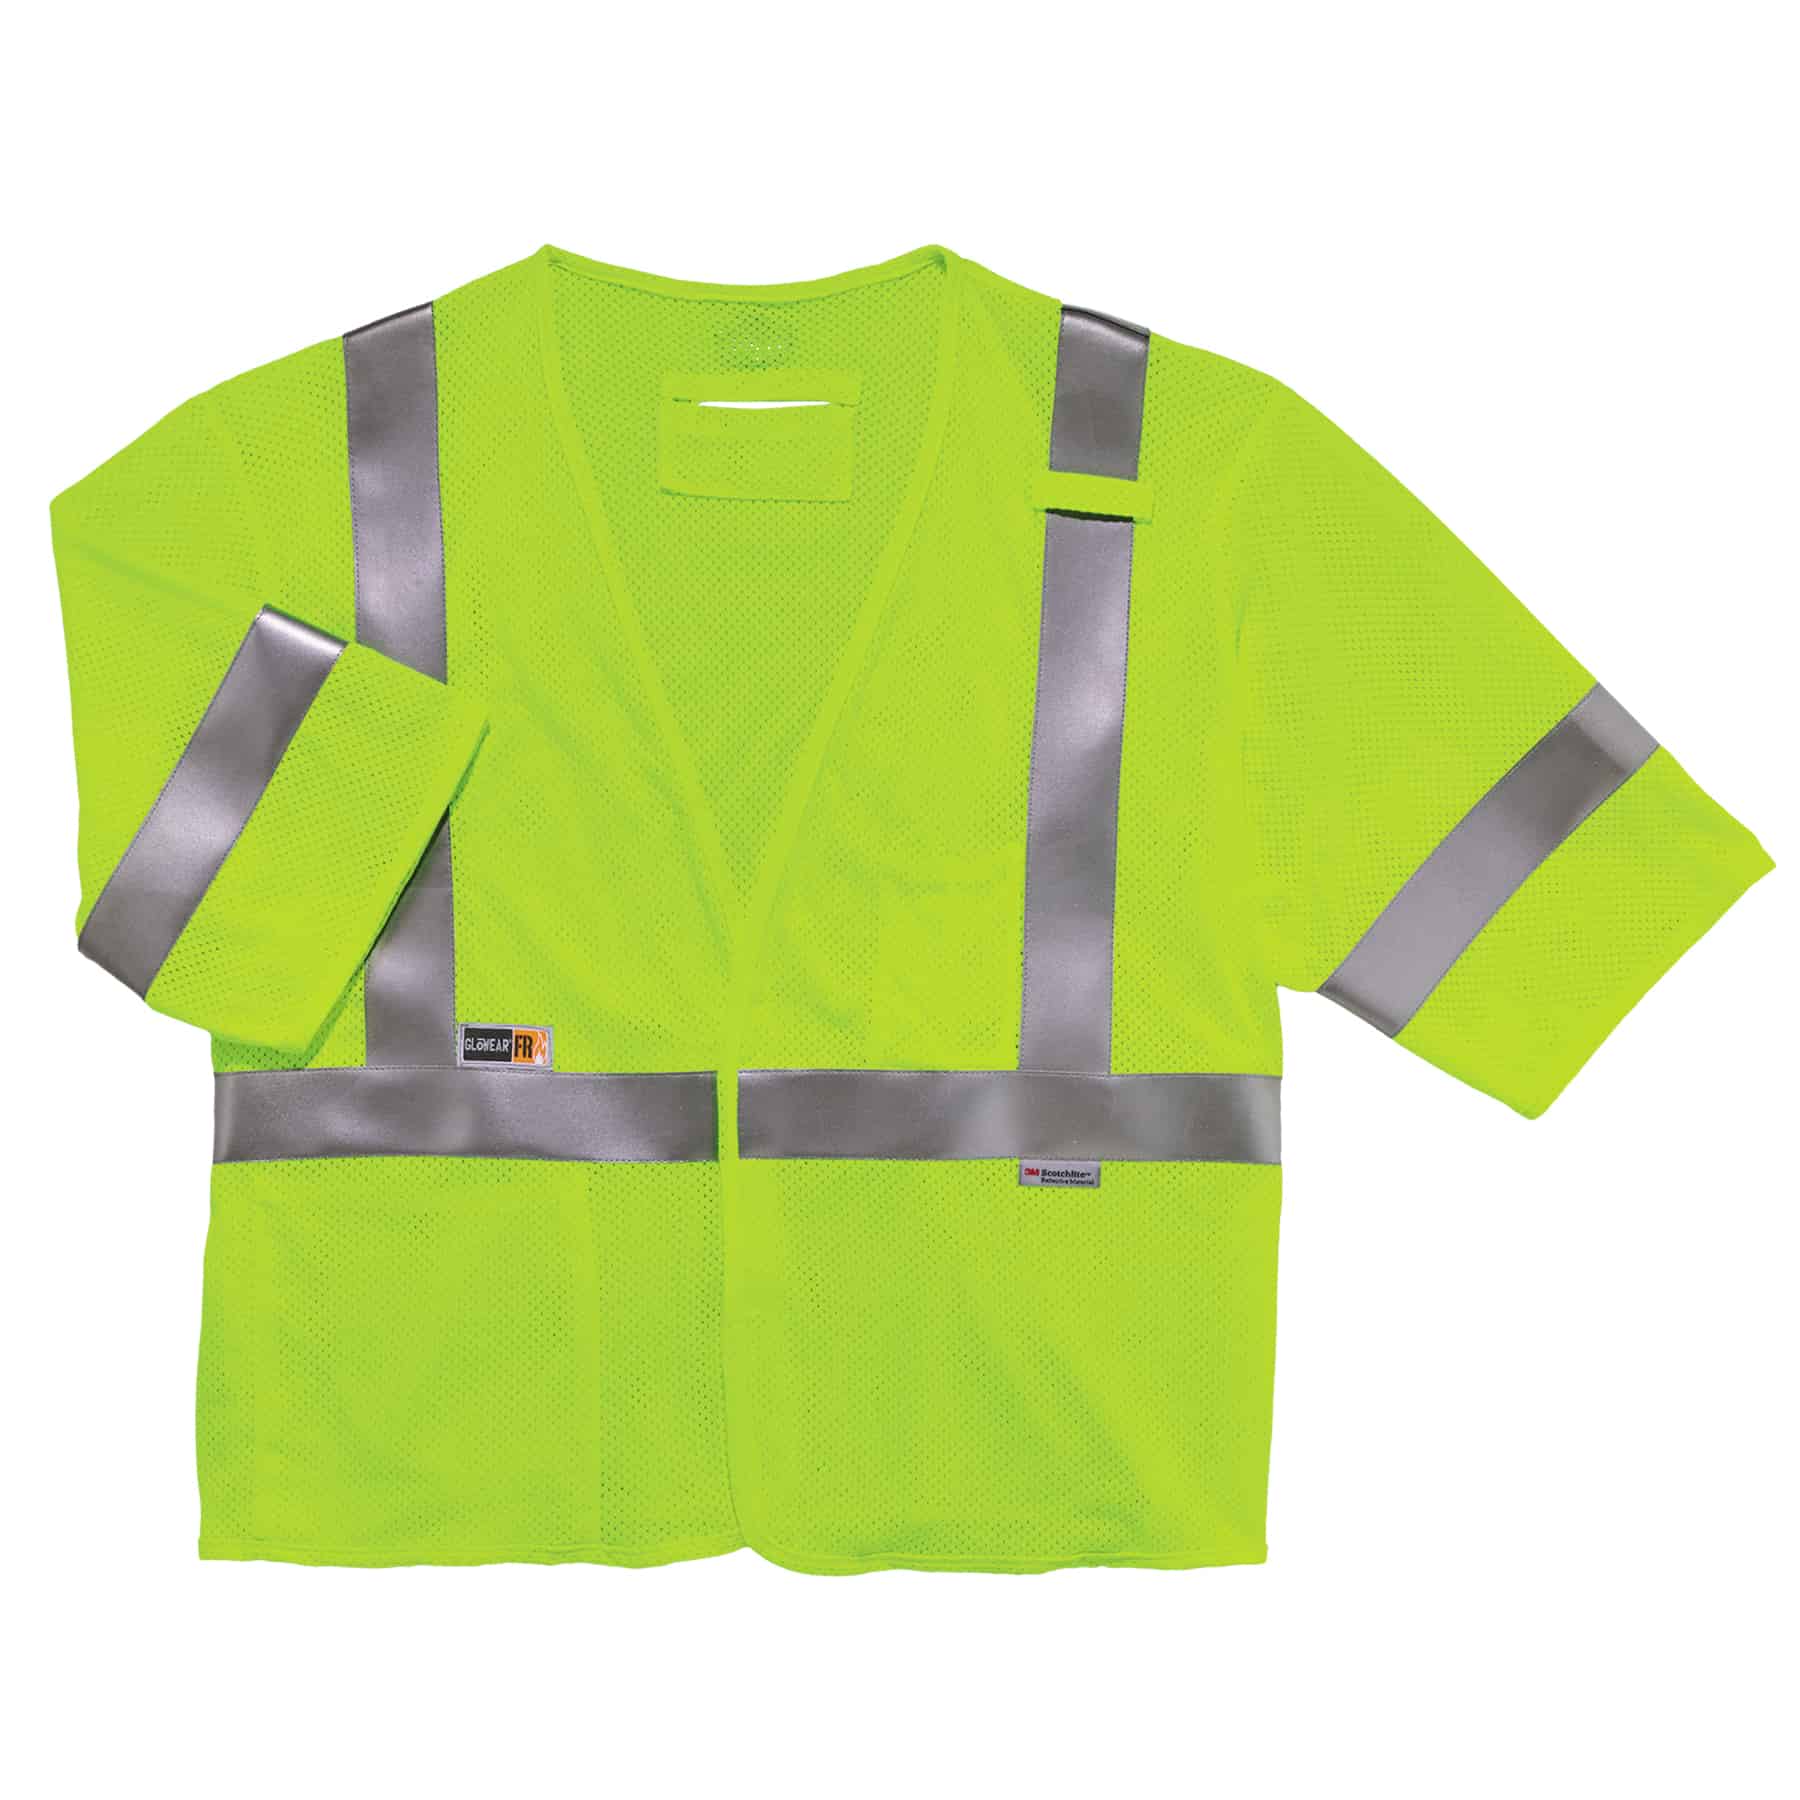 8415-01-598-4875 SIZE NSN SAFETY VEST 360 DEGREE HIGH VISIBILITY YELLOW UNIV 